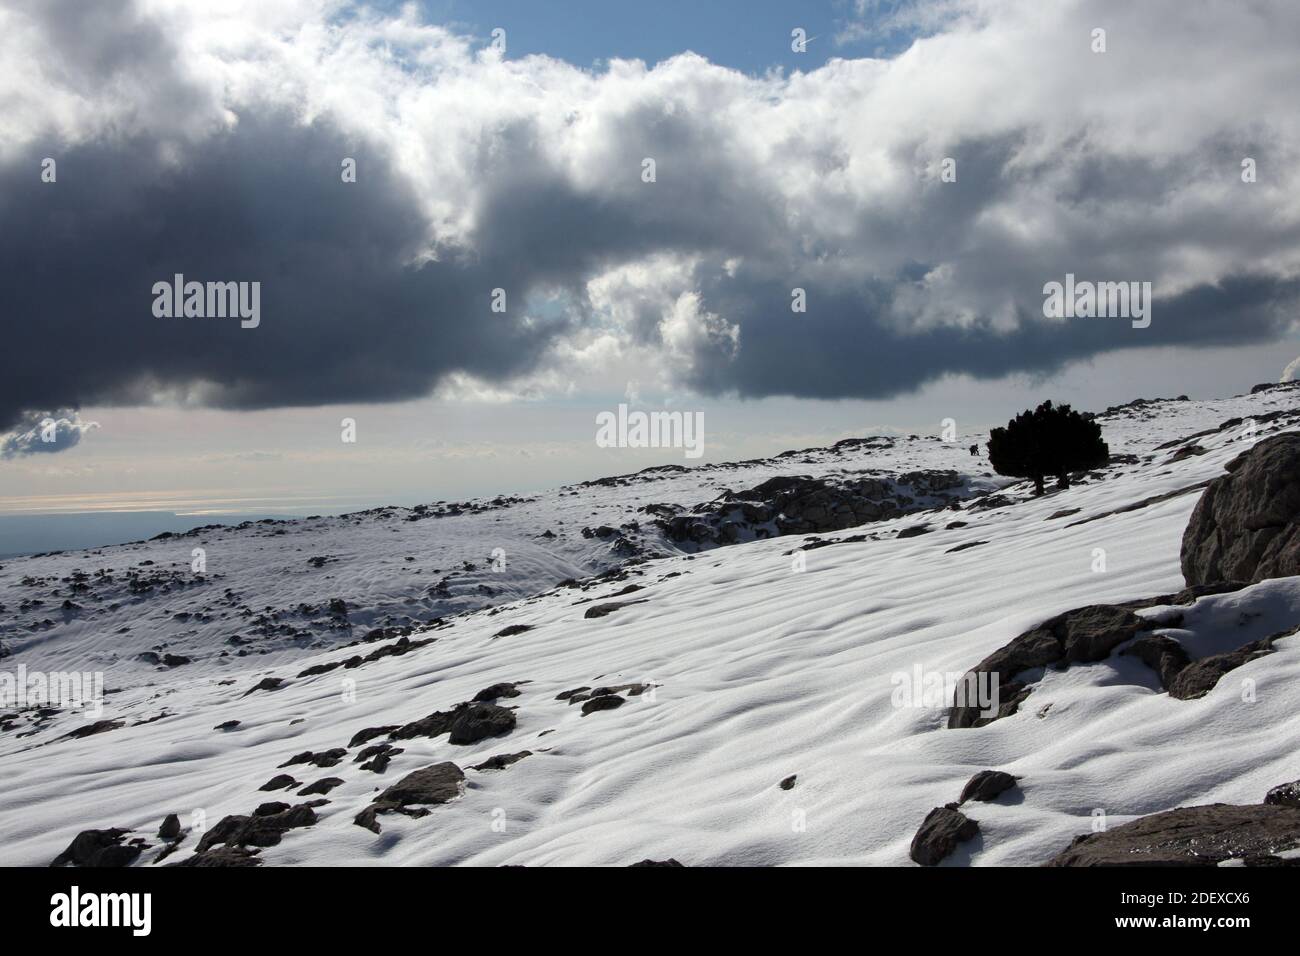 Majorcan mountain, named Massanella, completely snowy, with cloudy blue skies, in 'Serra de Tramuntana'. Stock Photo